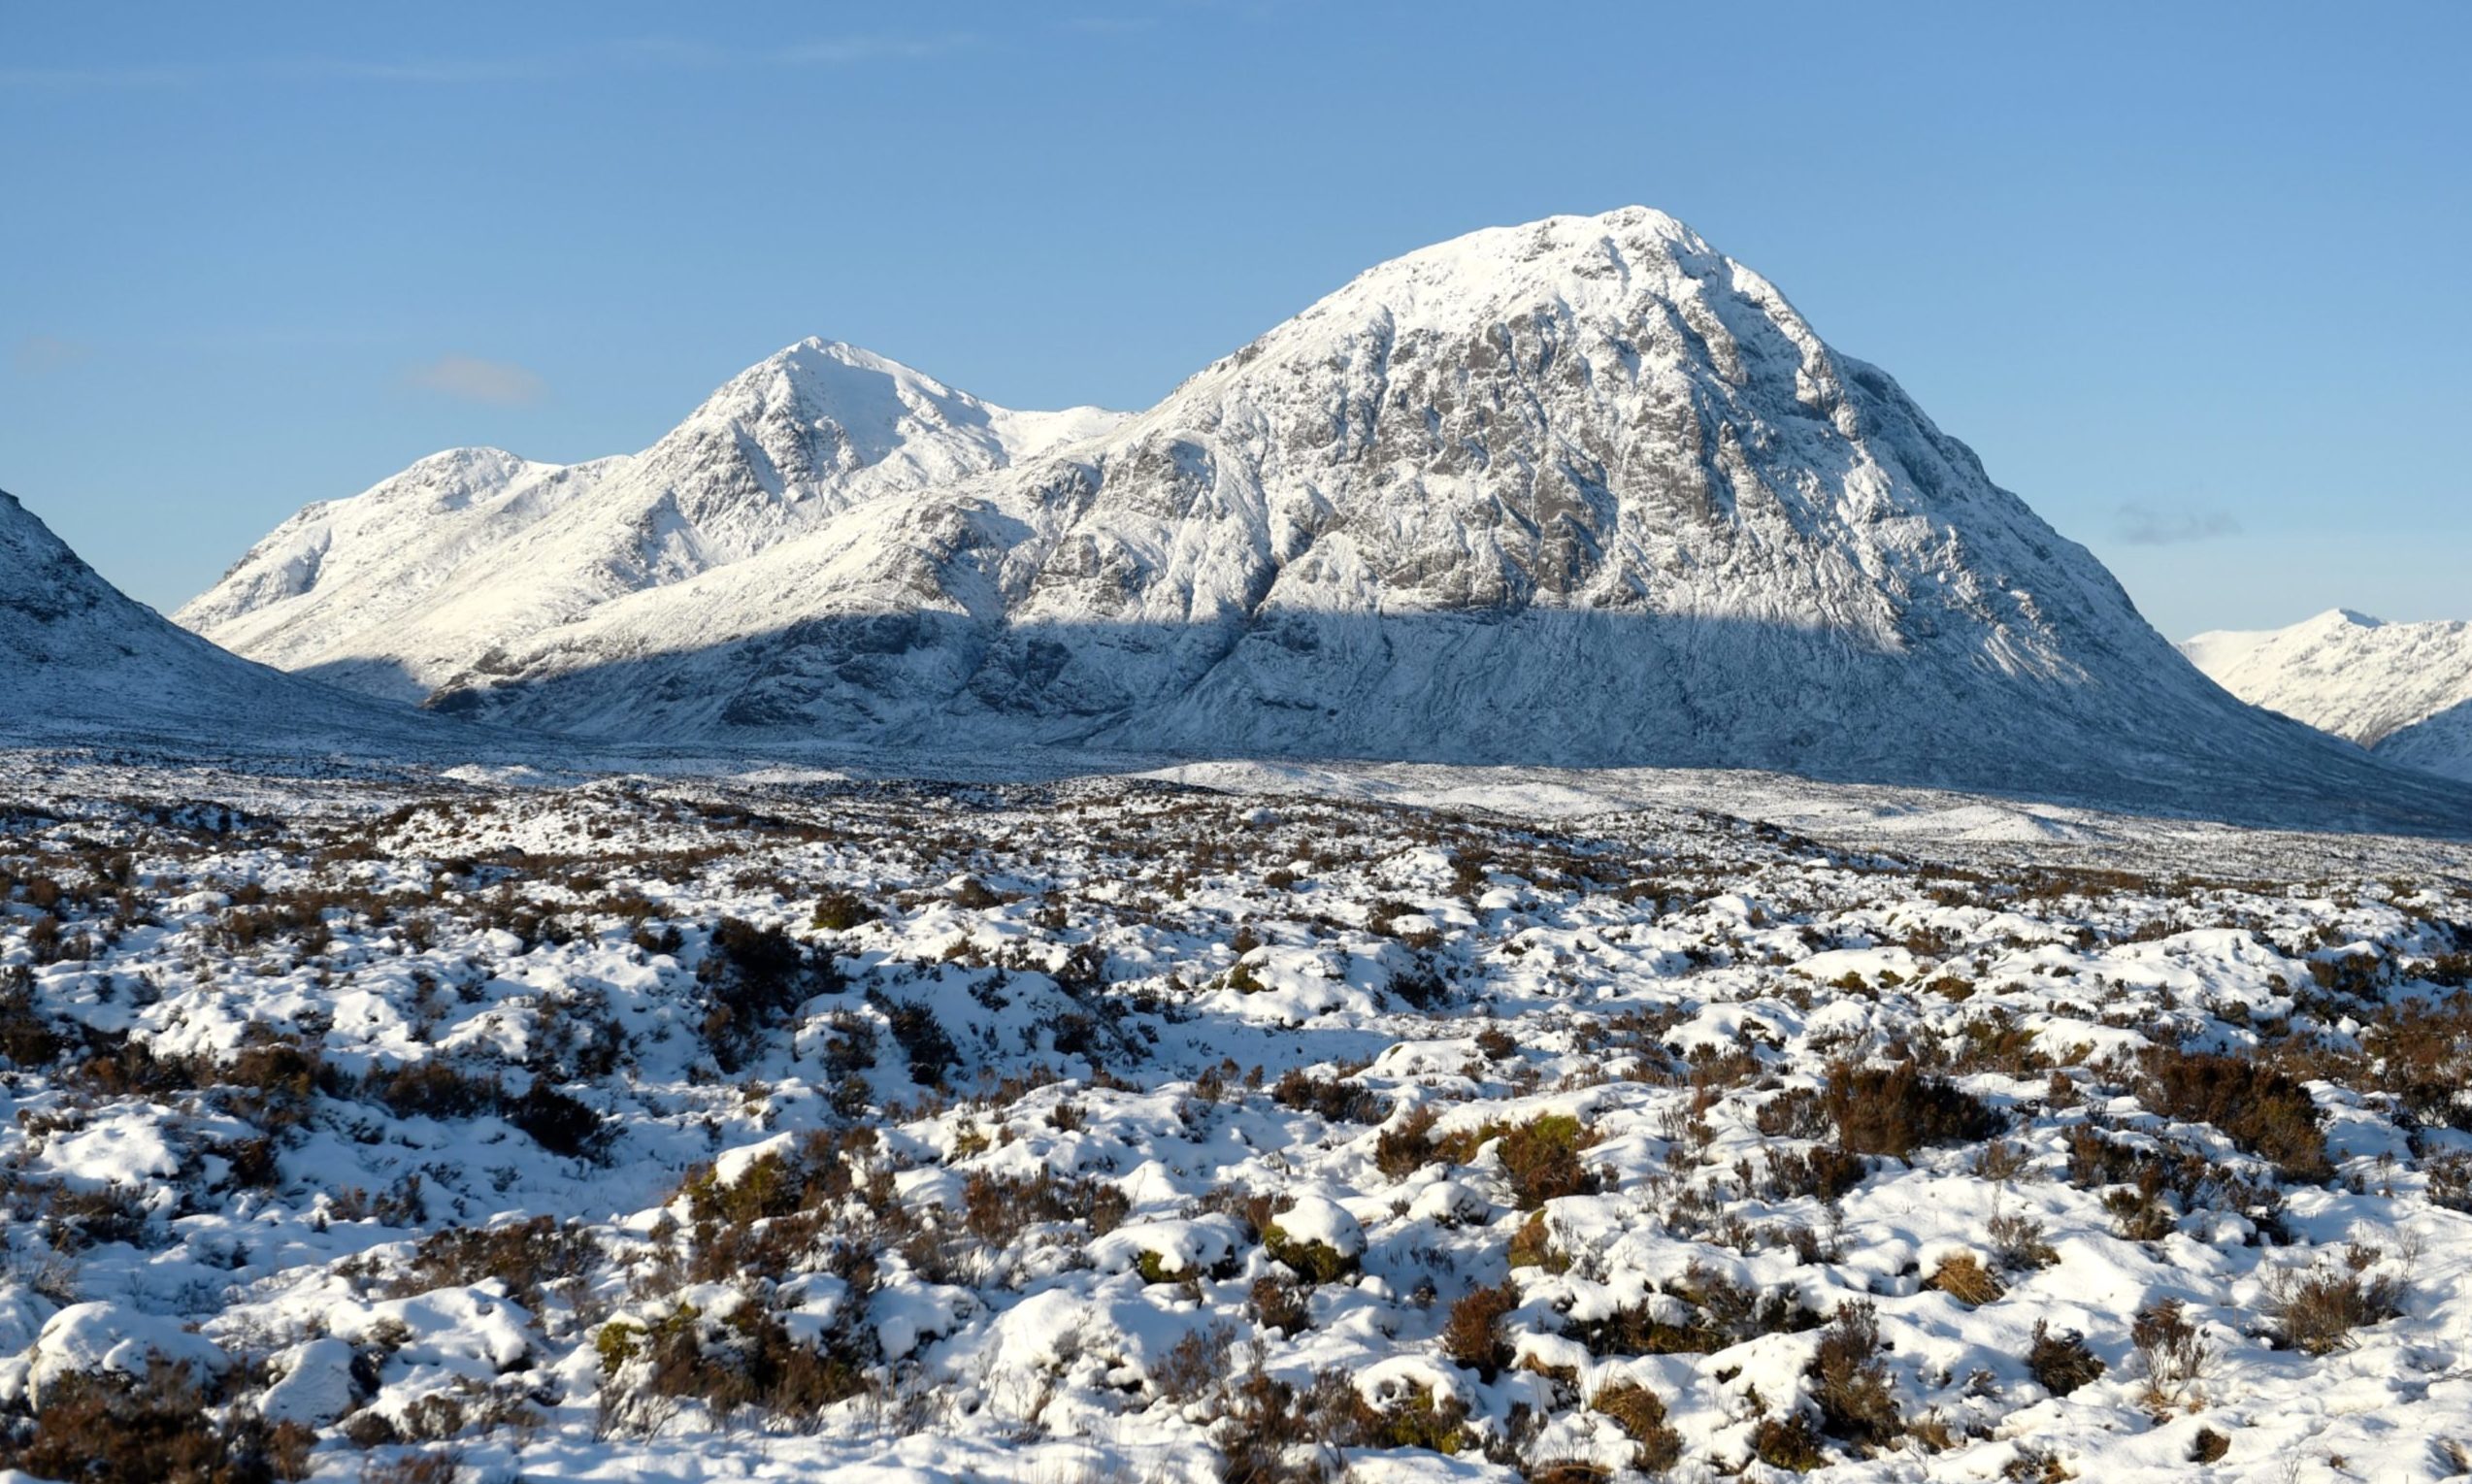 Buachaille Etive Mor with a coating of snow in Glen Coe in the Highlands.